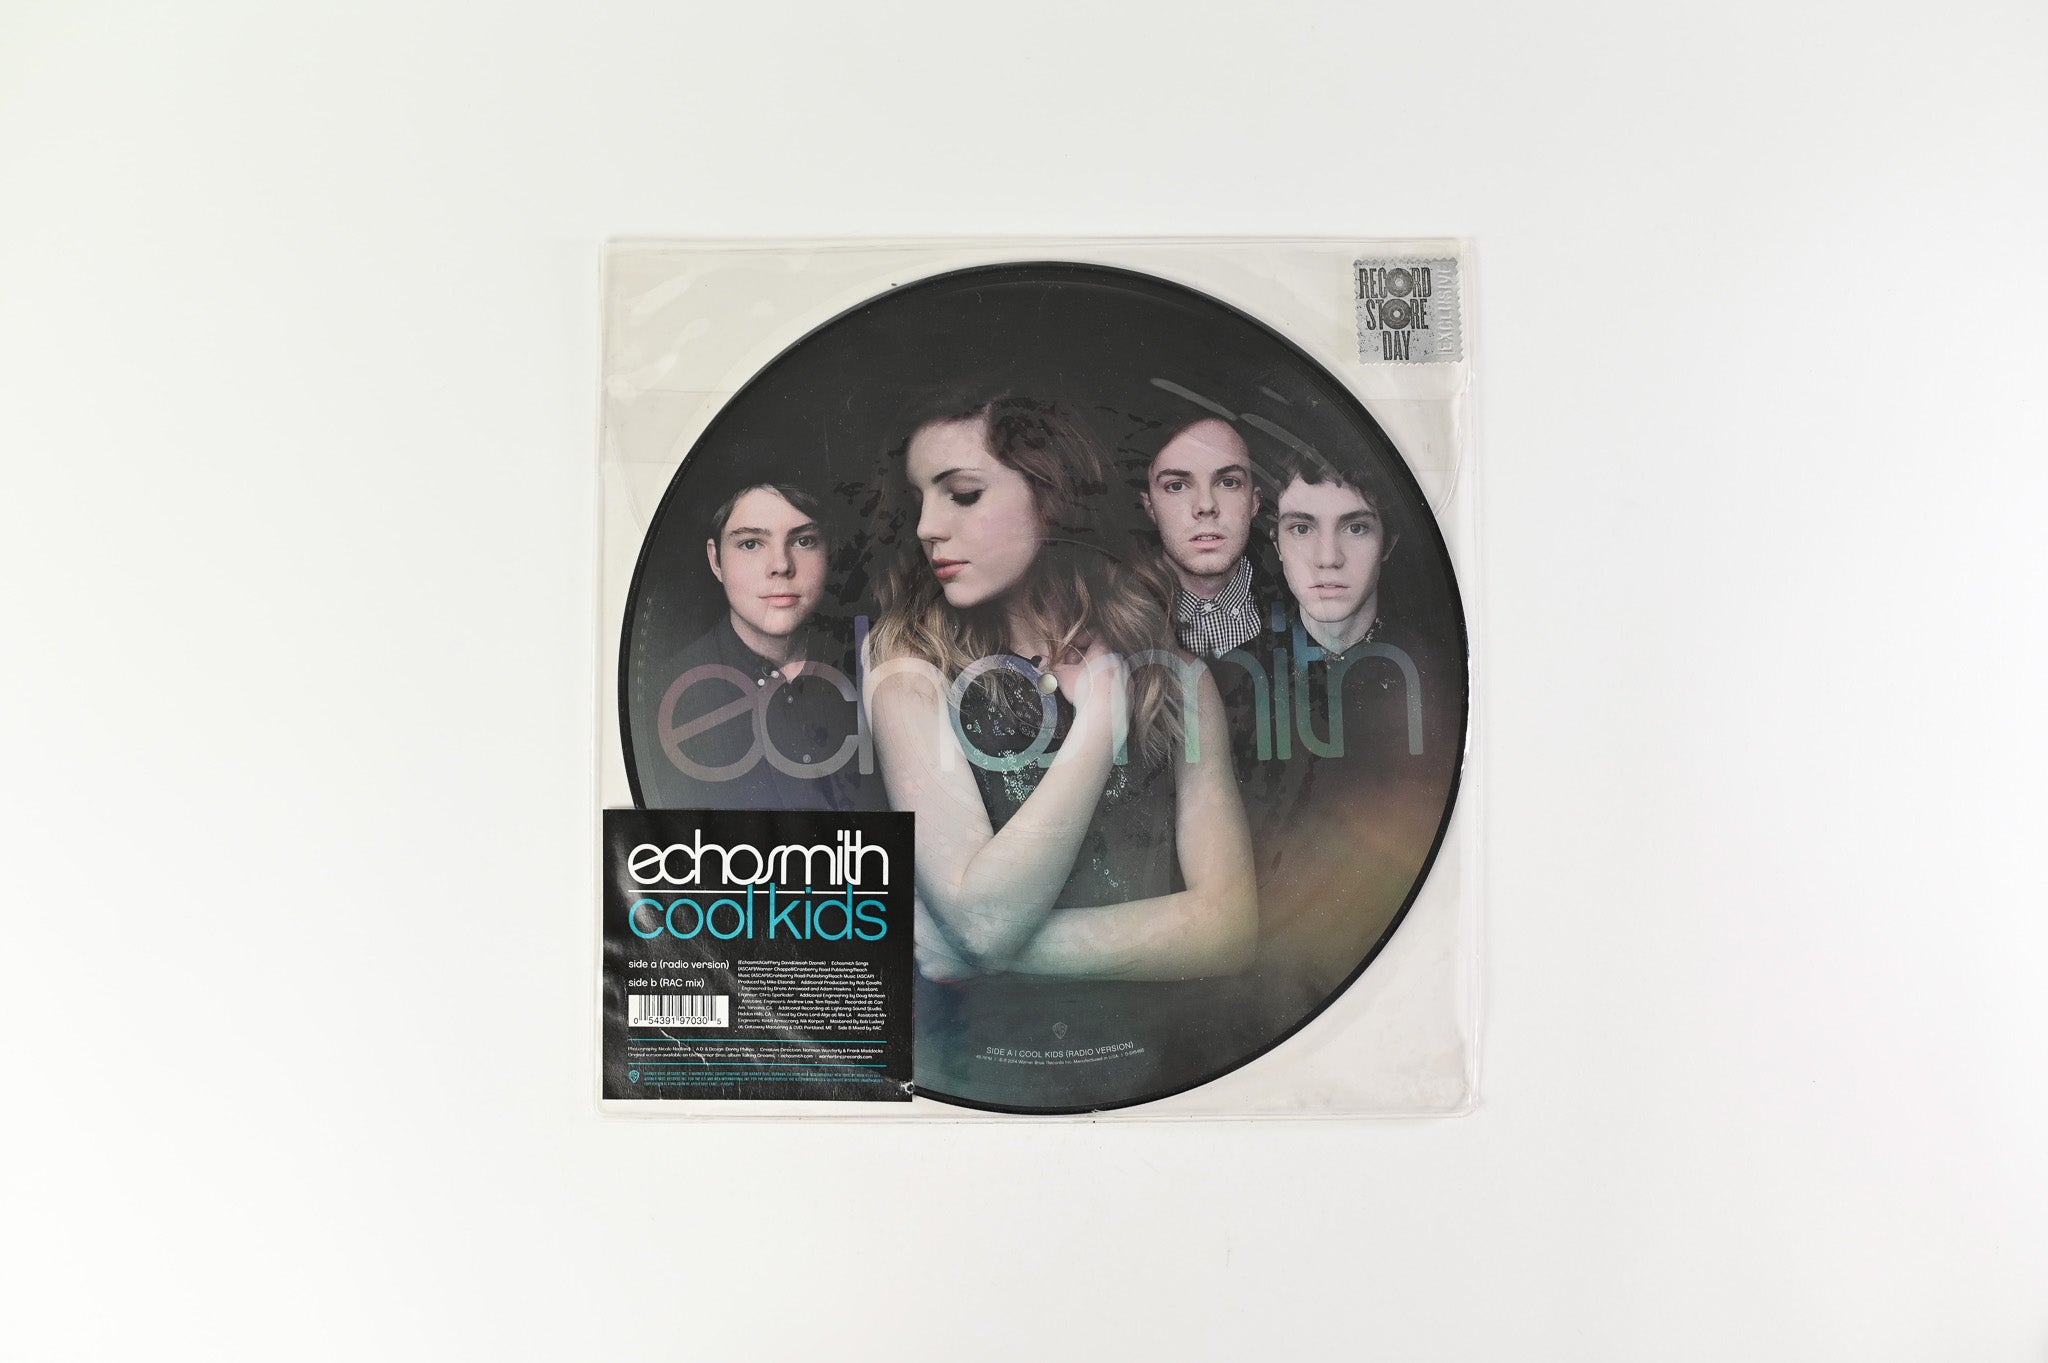 Echosmith - Cool Kids on Warner Bros. Records - Picture Disc RSD pressing